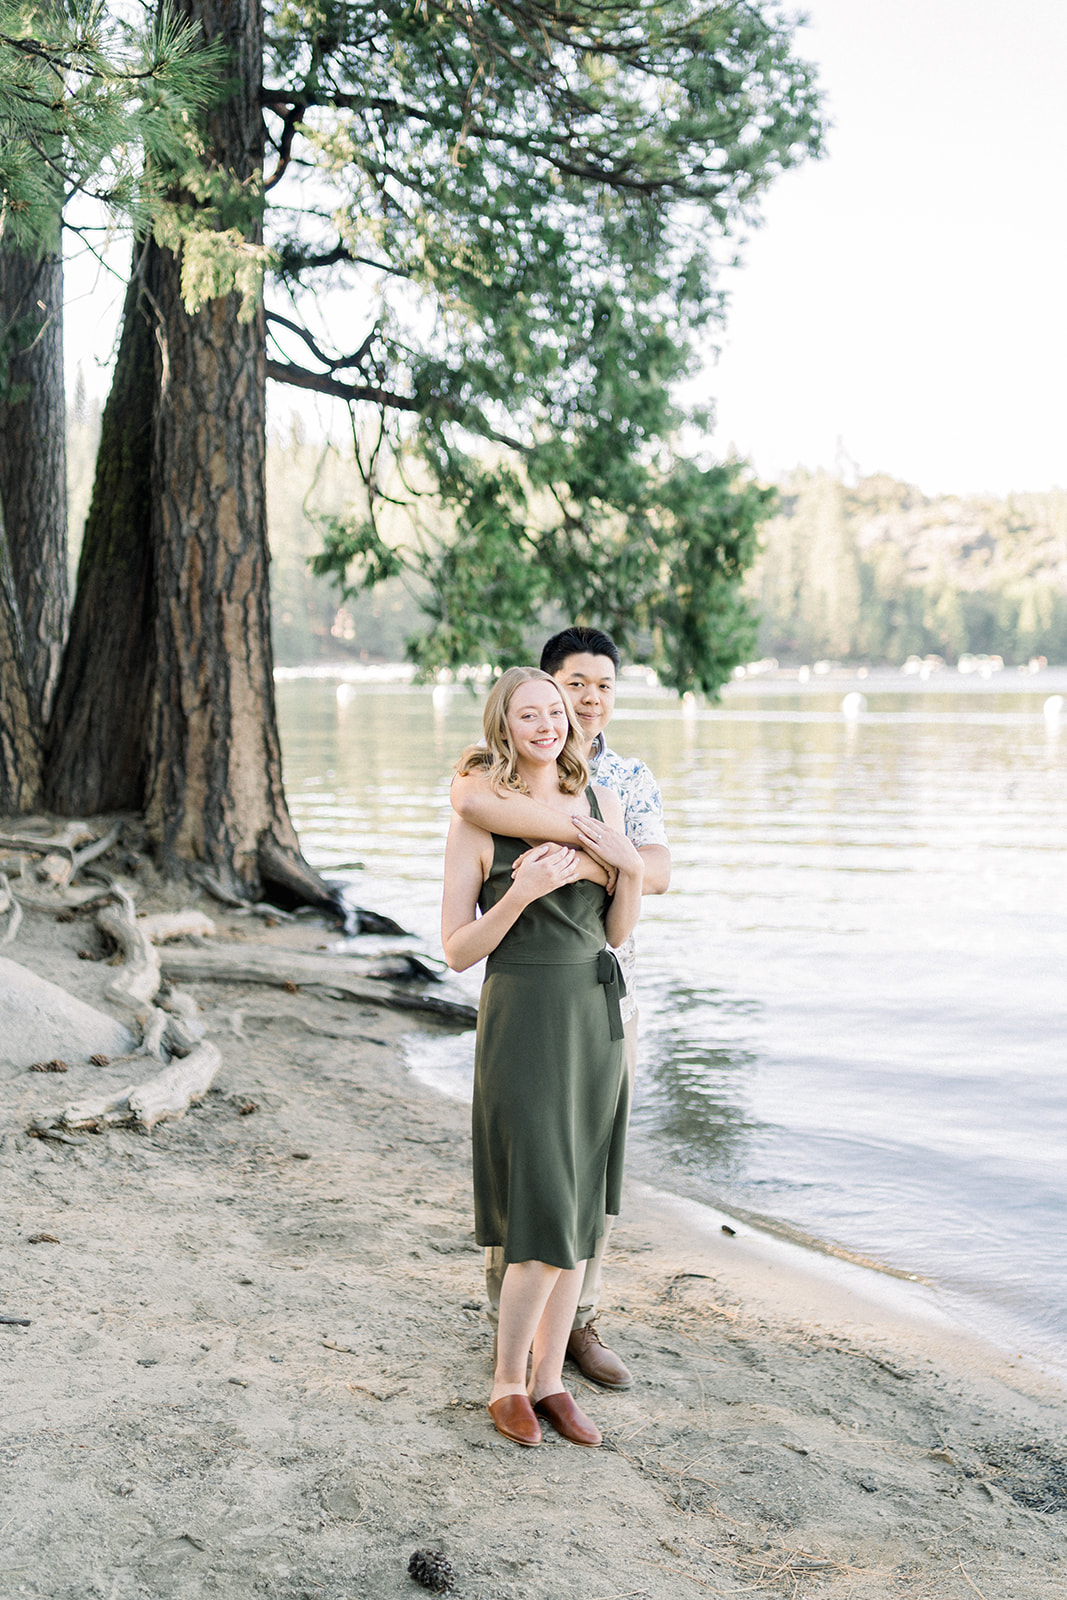 Caitlin and Andrew's Summer Engagement Photoshoot at Pinecrest Lake, CA